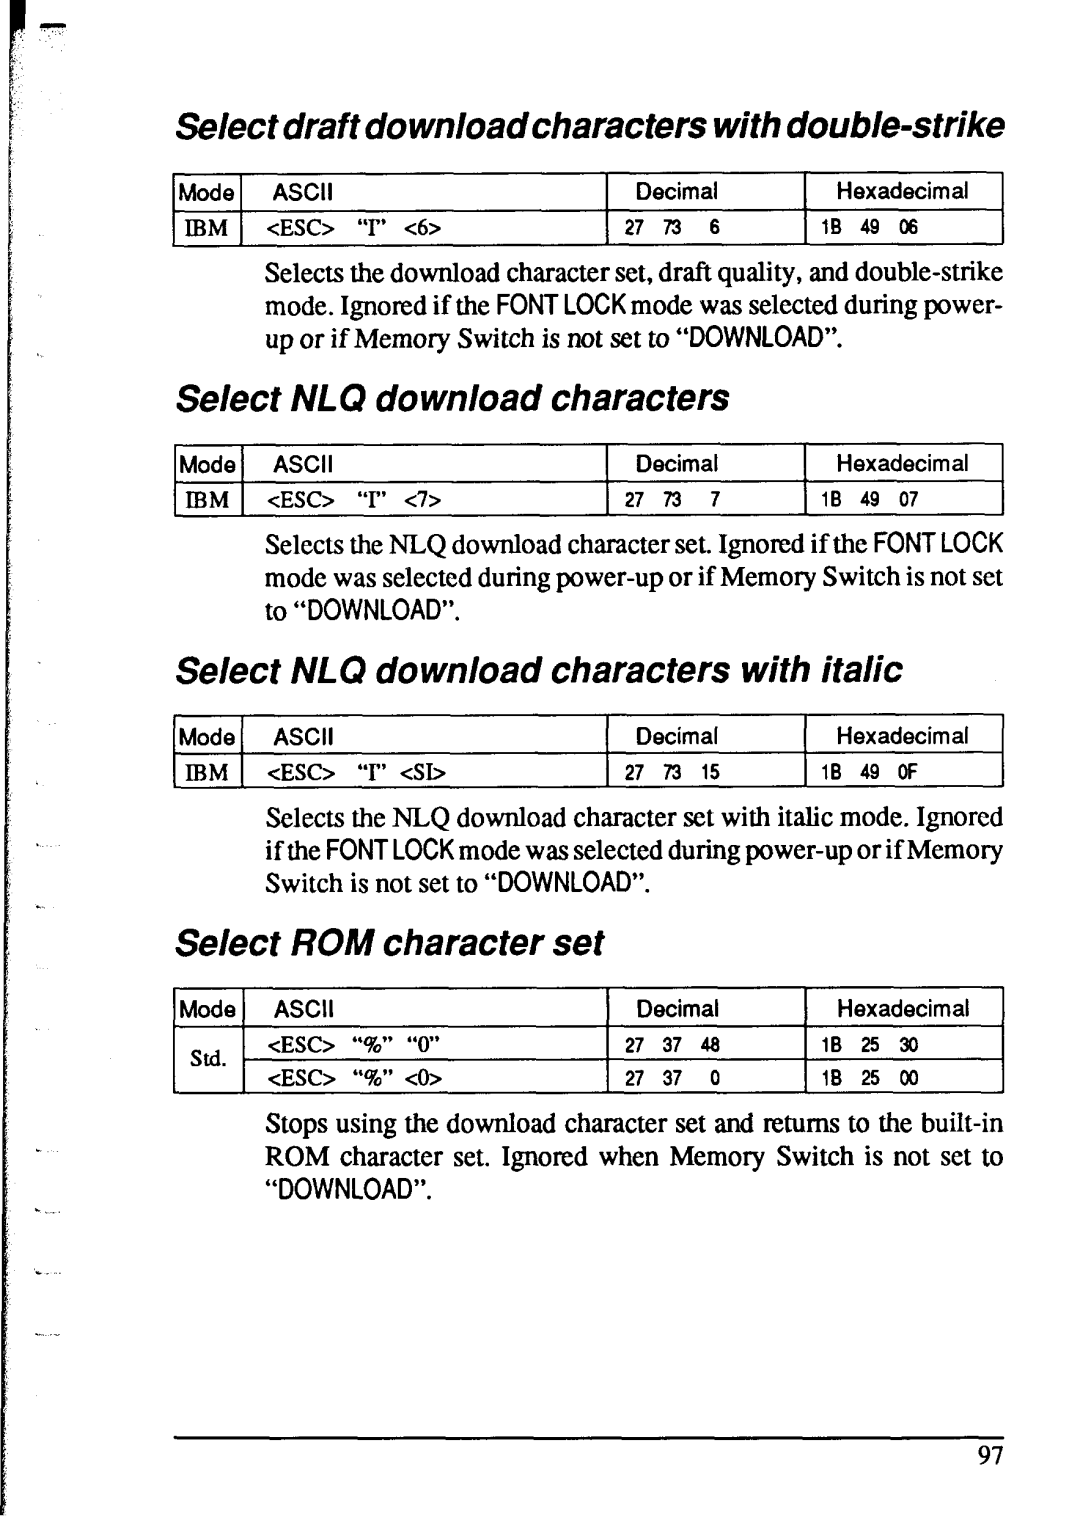 Star Micronics XR-1520 manual Selectdraftdownloadcharacterswithdouble-strike, Select NLQ download characters, to “DOWNLOAD” 